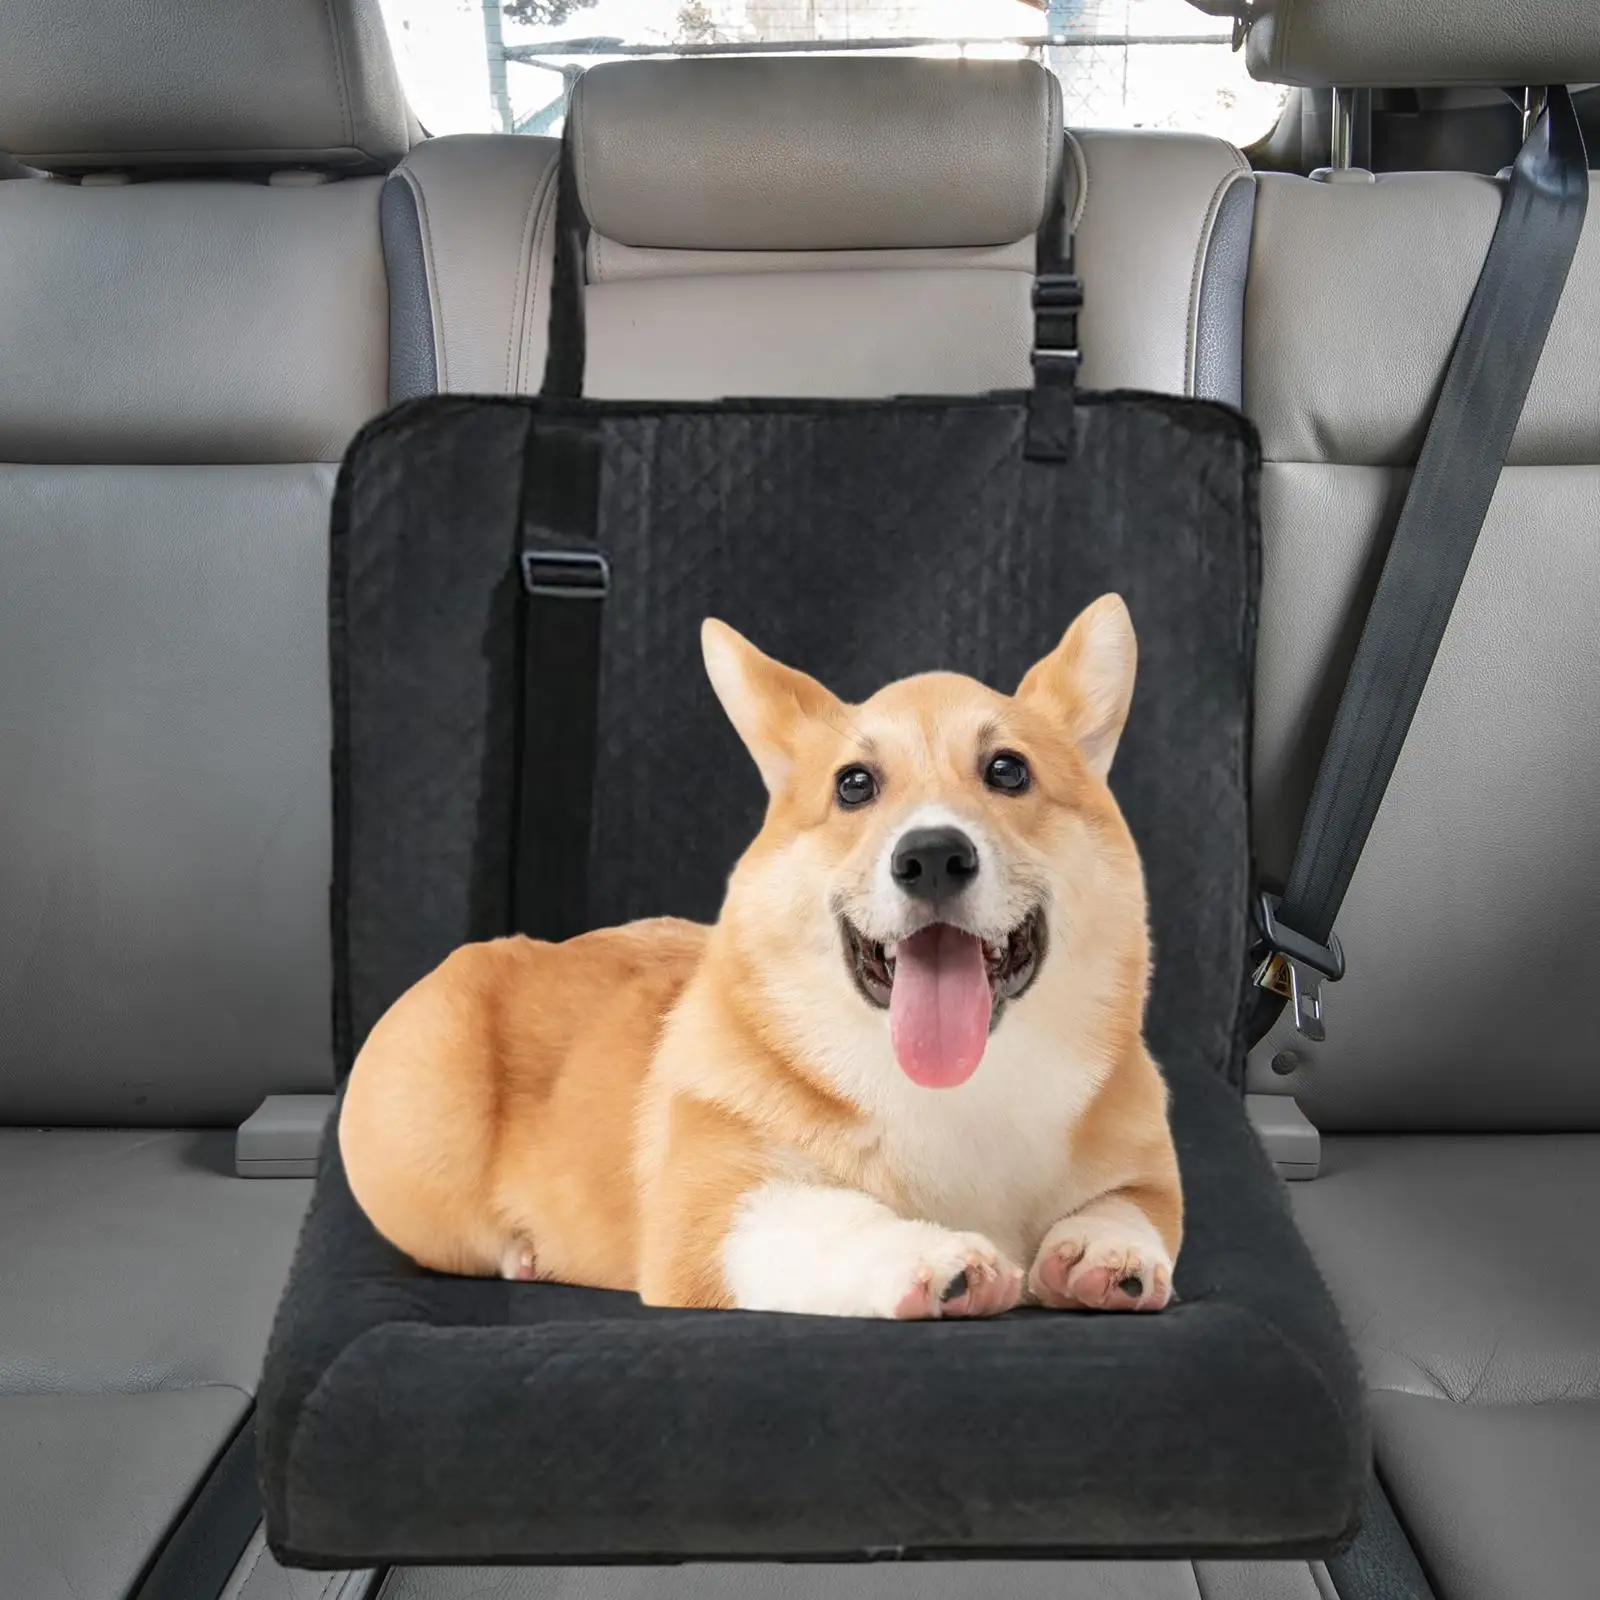 Dog Car Seat Booster Seat Detachable Carrier Cage Bed Small Medium Dogs Non Slip Puppy Car Transport Car Armrest Box Kennel Nest